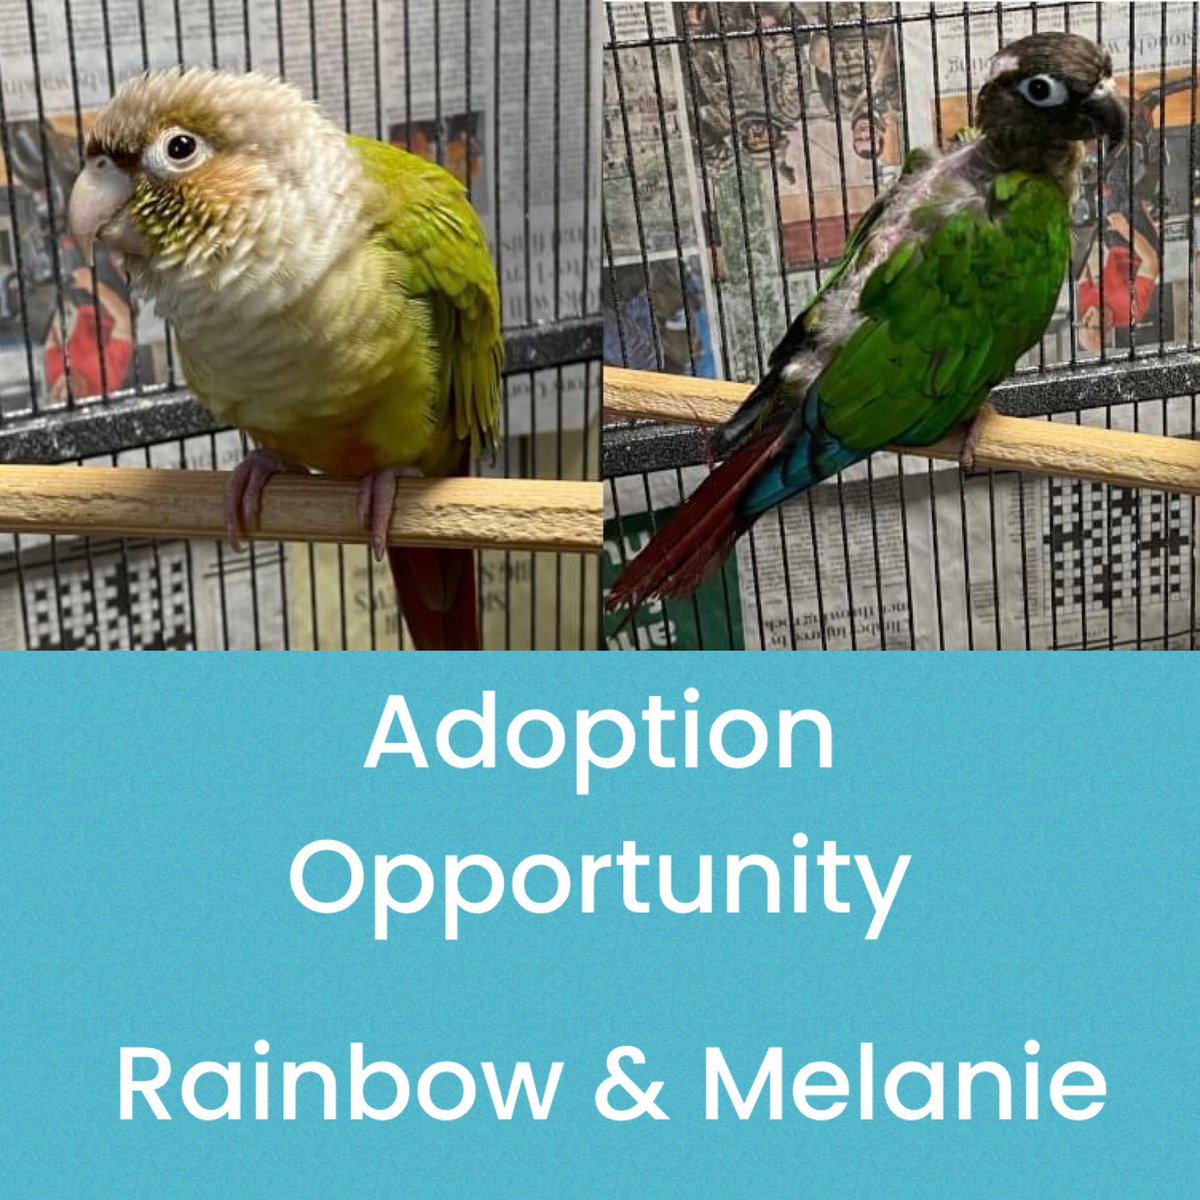 Adoption Opportunity in Lincolnshire, UK. If you are interested in adopting Rainbow and Melanie the green cheek conures, please go to katarascompanions.org.uk/adopting-with-… to read their profile and fill out an application form!